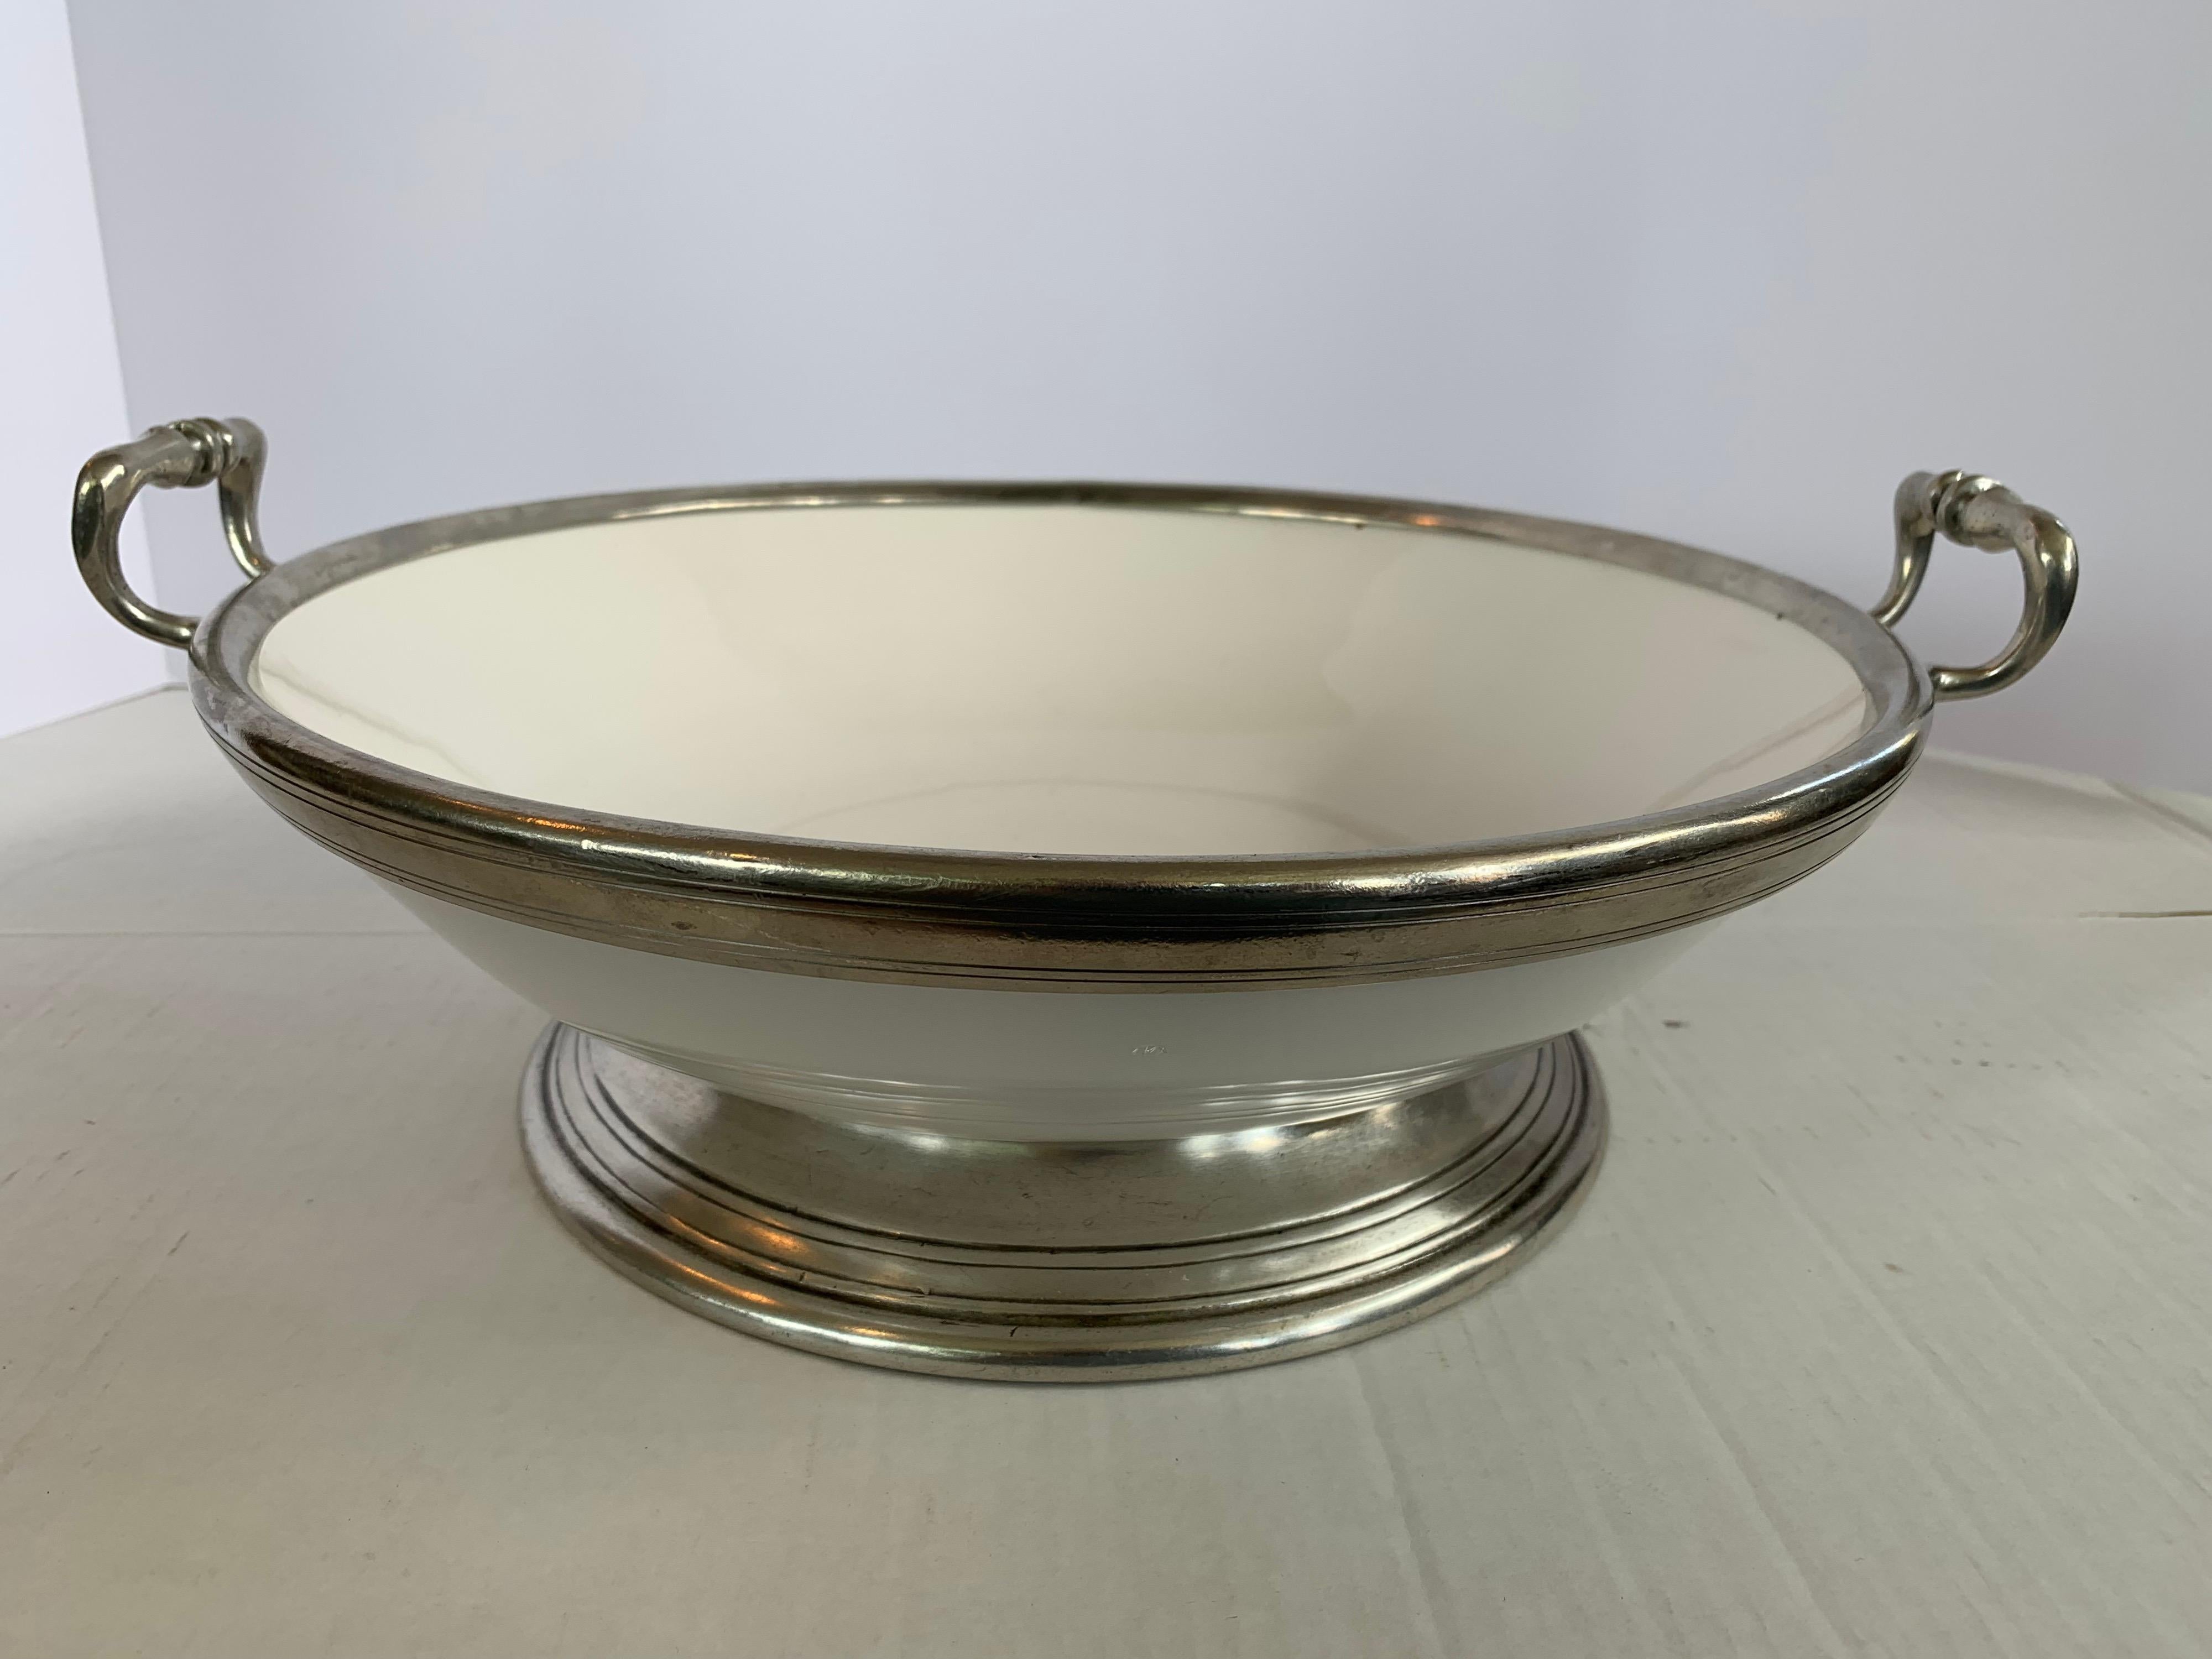 Large Arte Italica serving bowl with silver rim, base and handles. There is a matching handed platter that is in another listing on our 1stdibs platform this week.